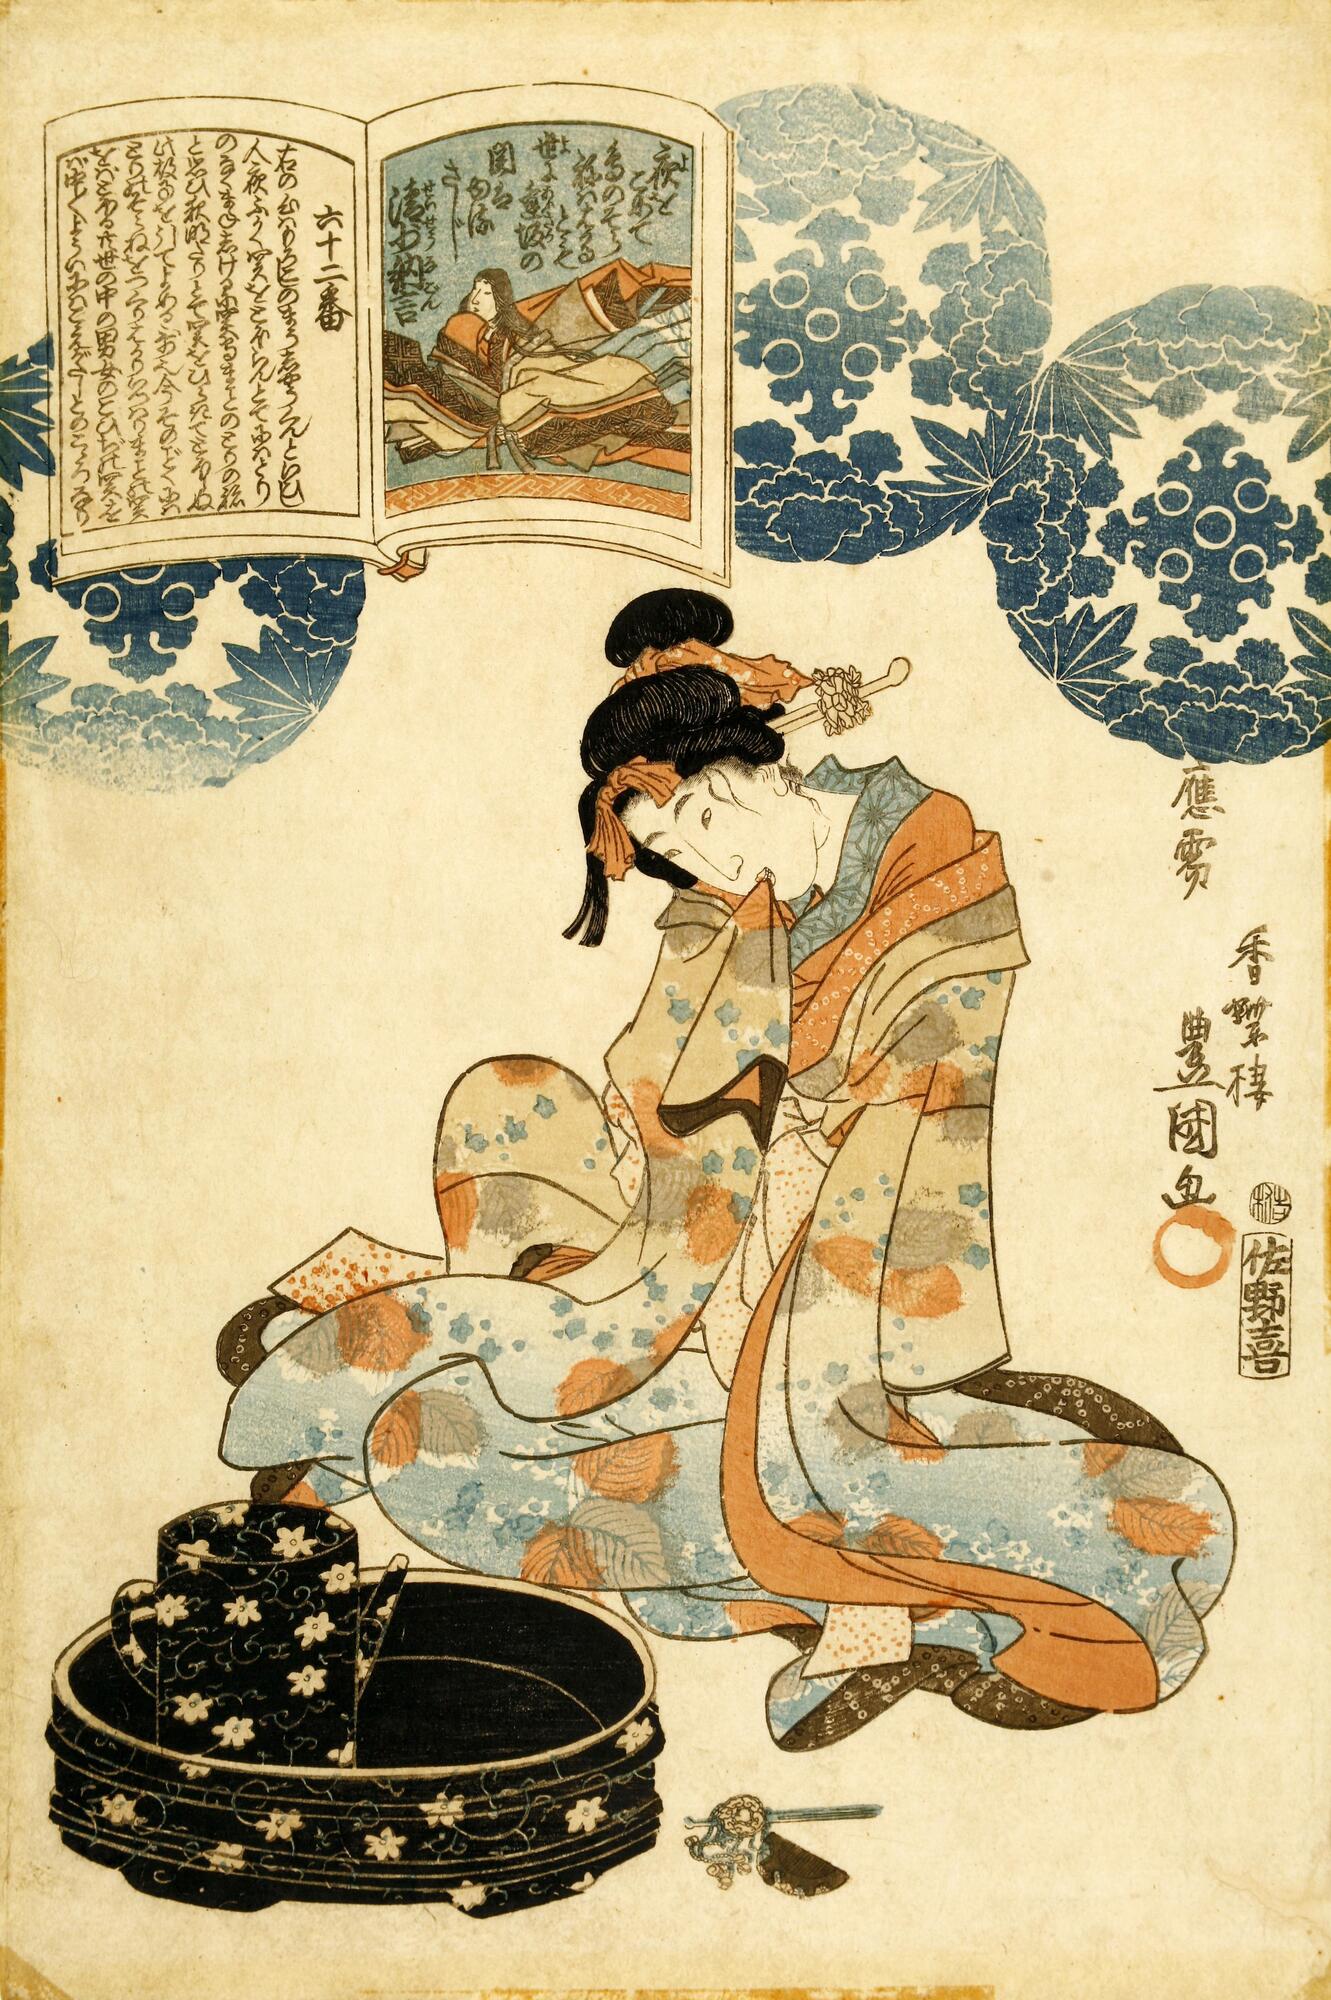 A woman in kimono sits with her sleeve to her mouth. The kimono is decorated with fall leaves, and she sits behind lacquwe tea ware. Above her are crest-like decorations in blue, backgrounding the open pages of a book.